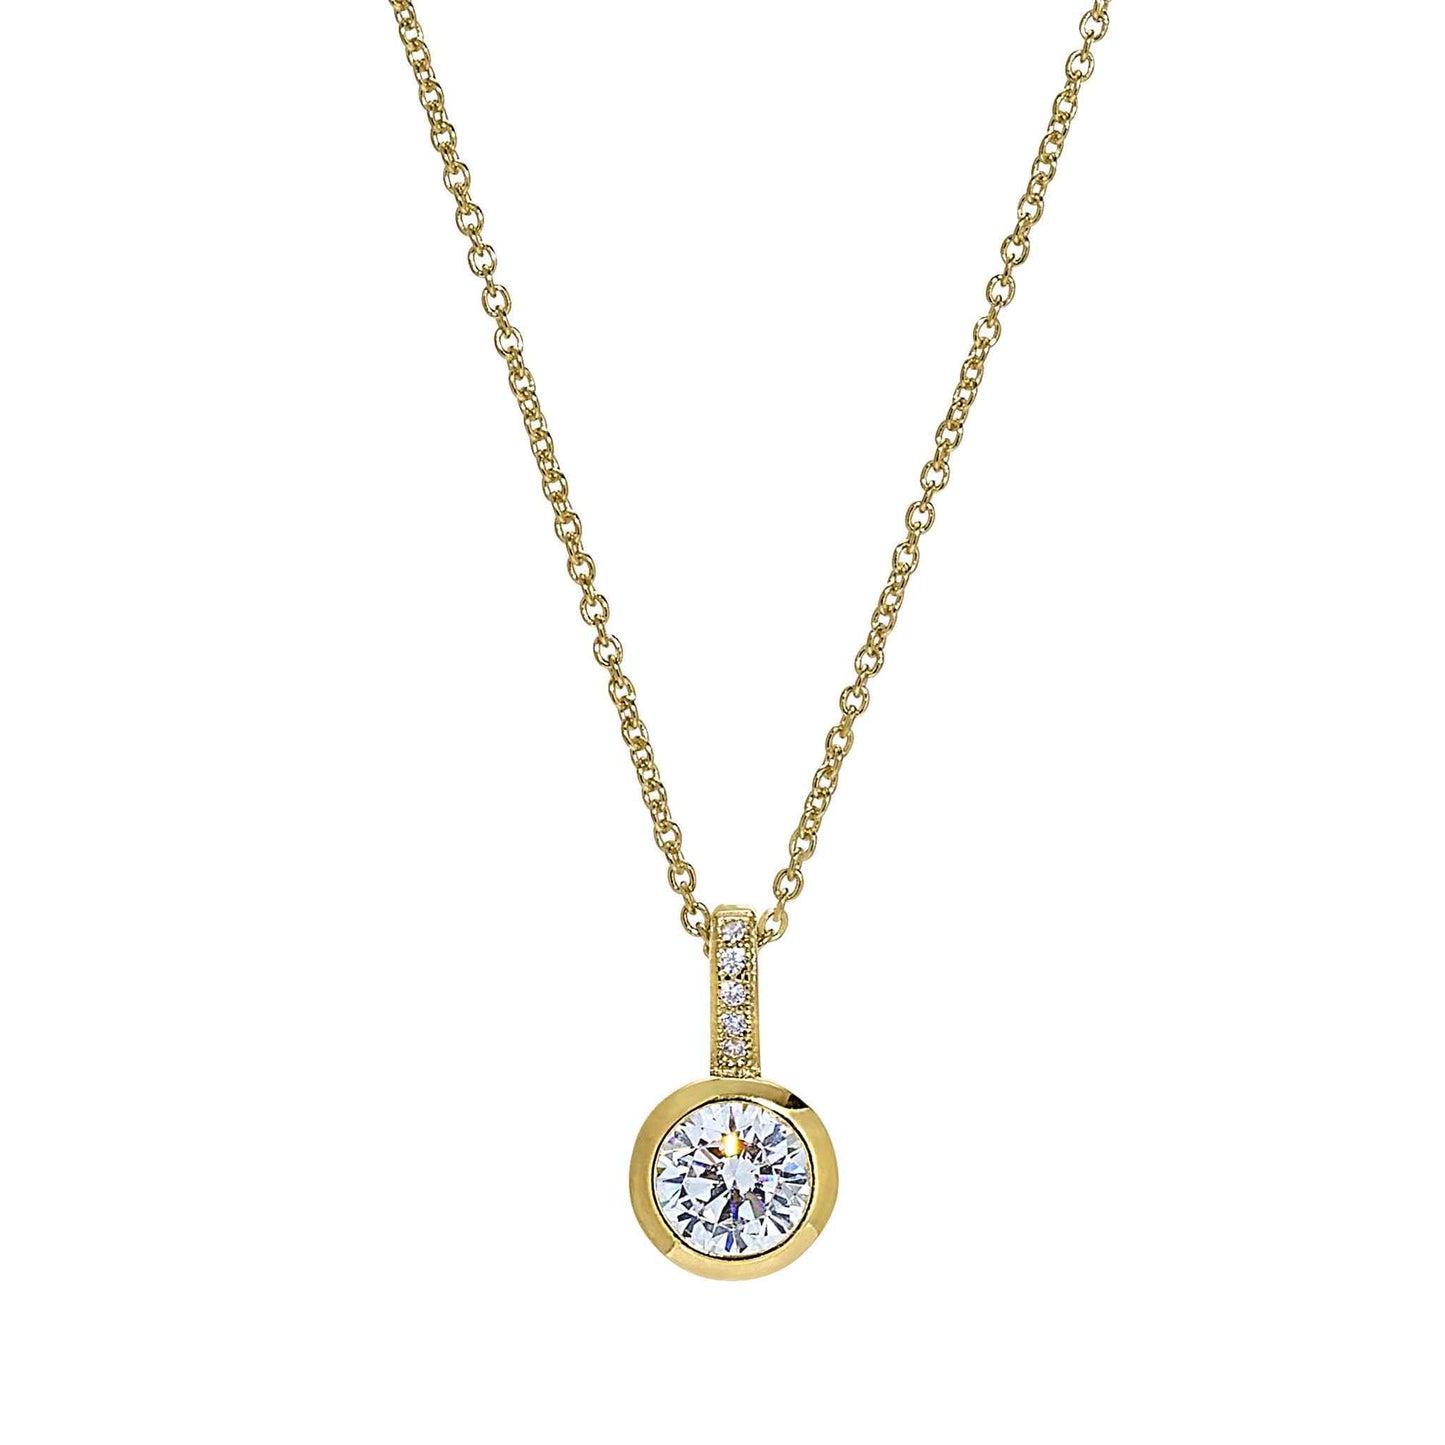 A drop bezel necklace with simulated diamonds displayed on a neutral white background.